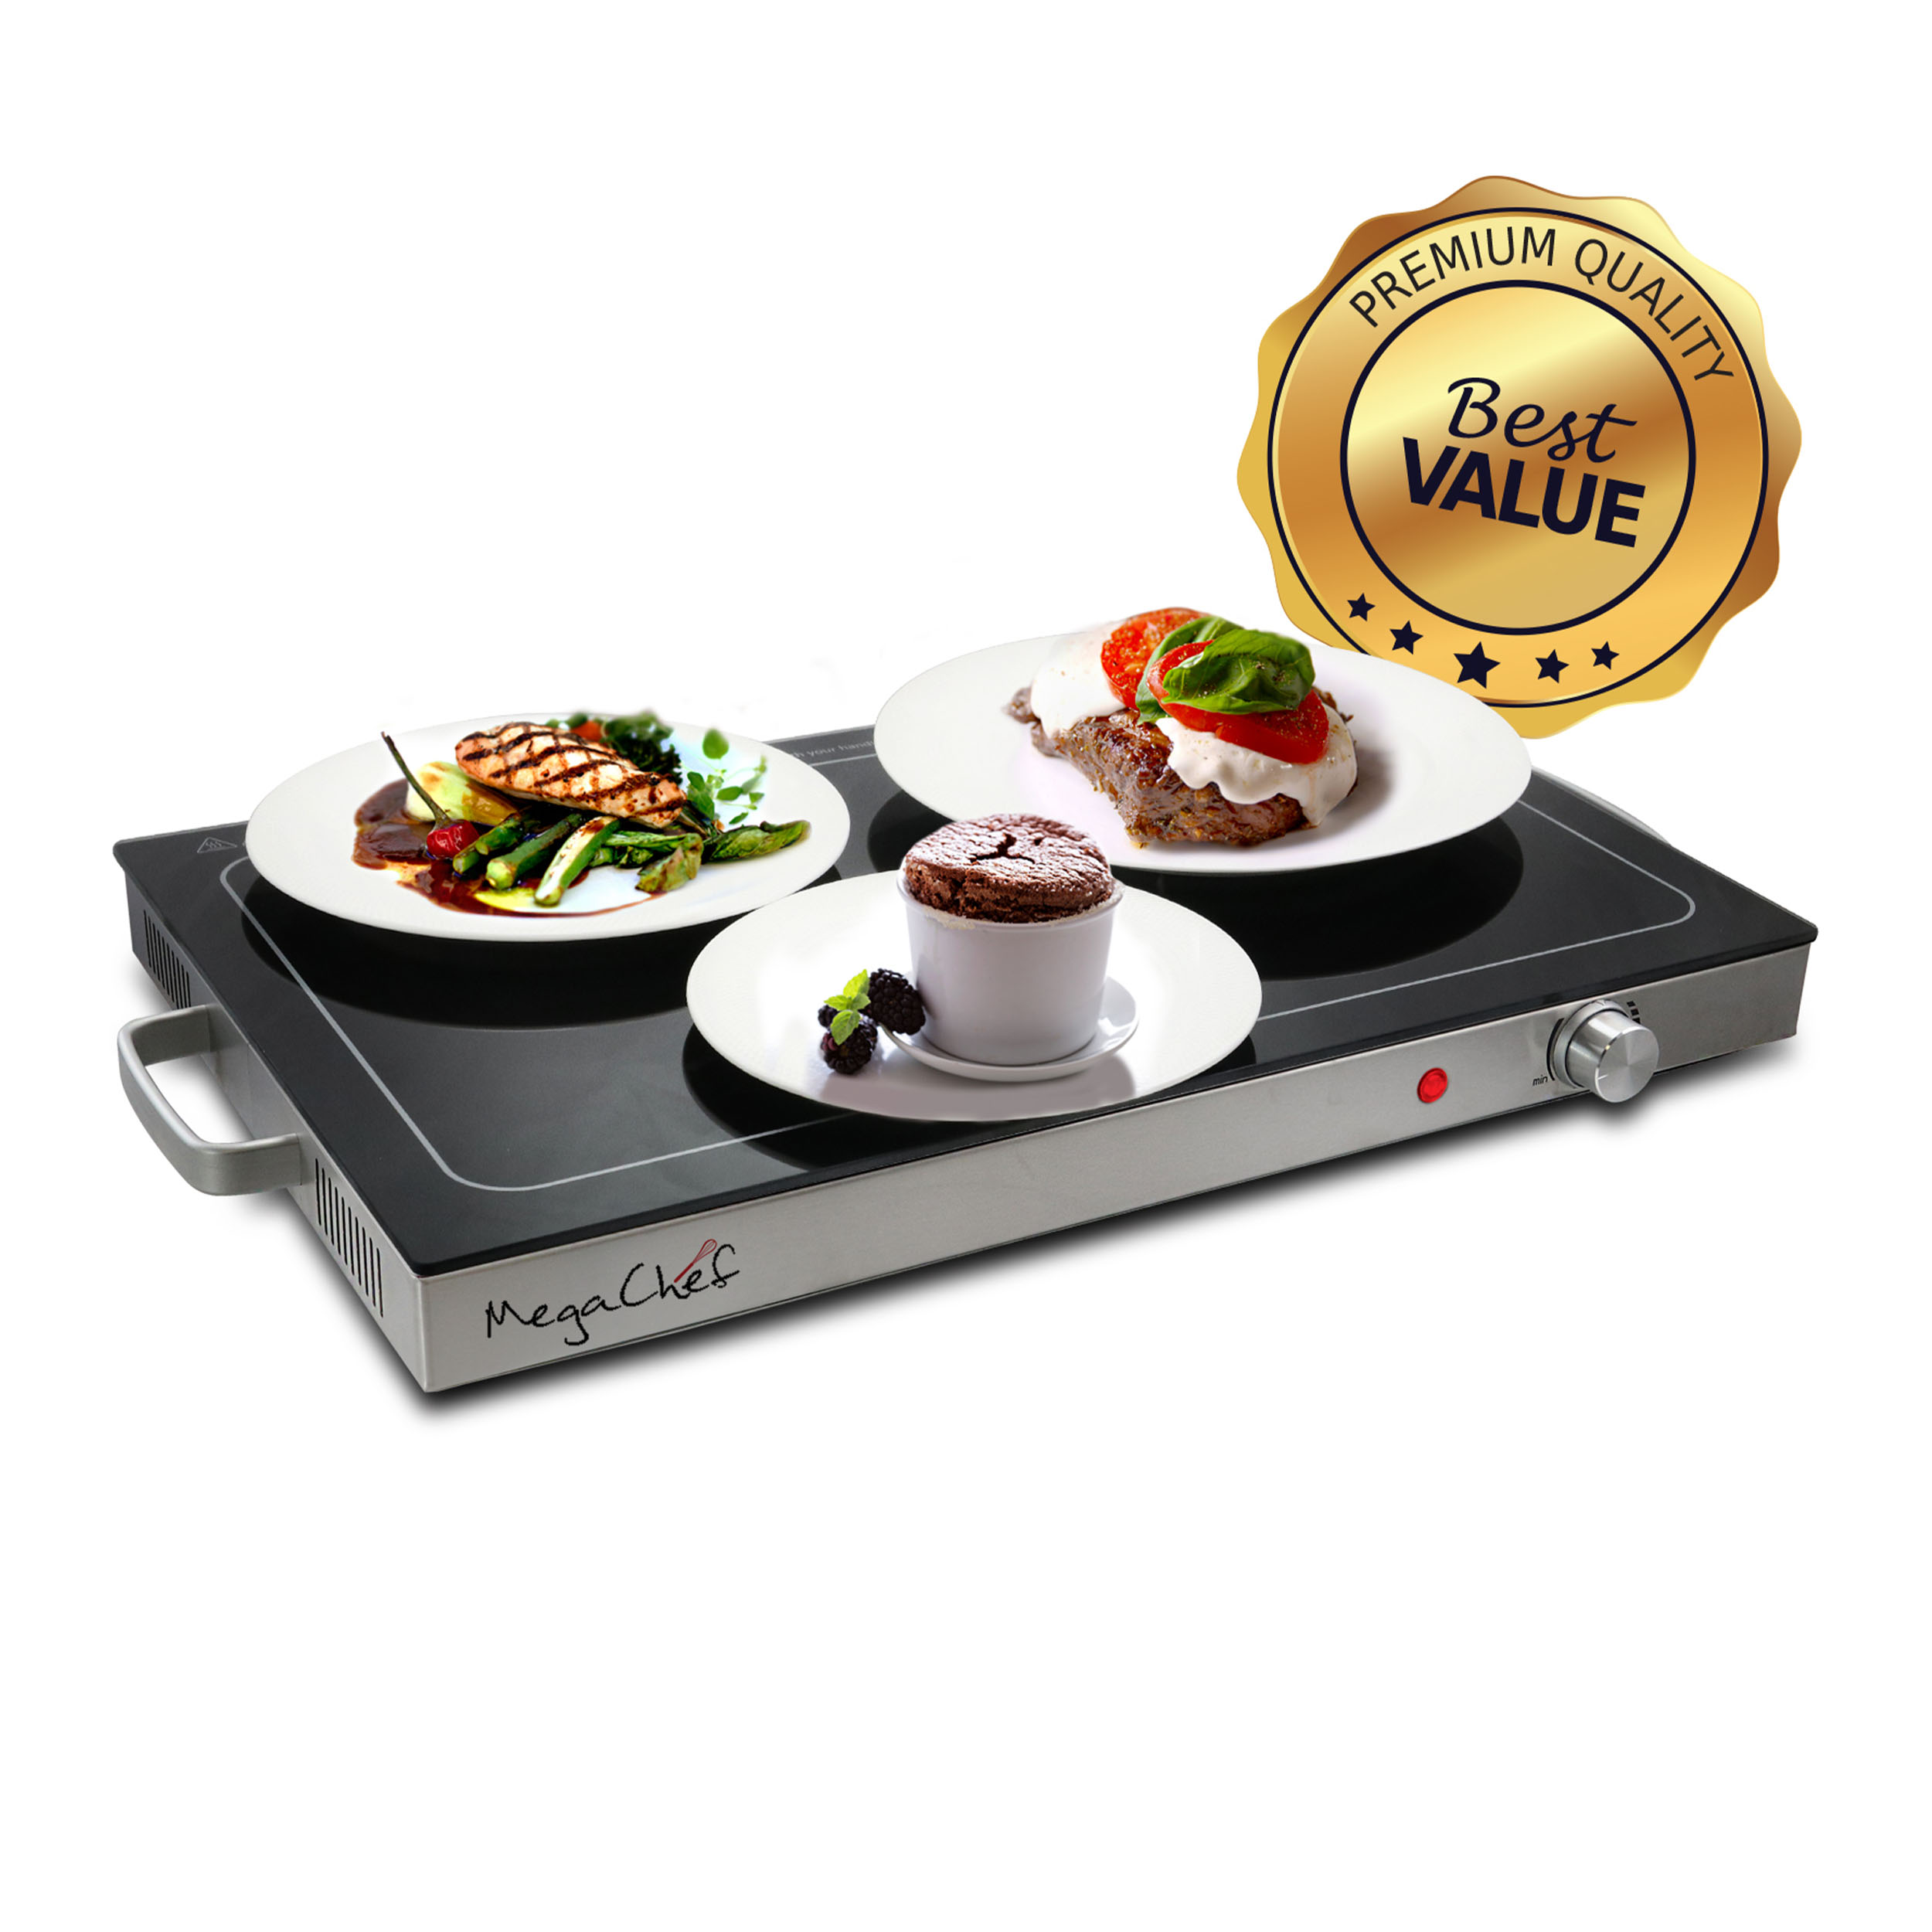 Coordless Hot Plate Food Warmer - Electric Hot Plate